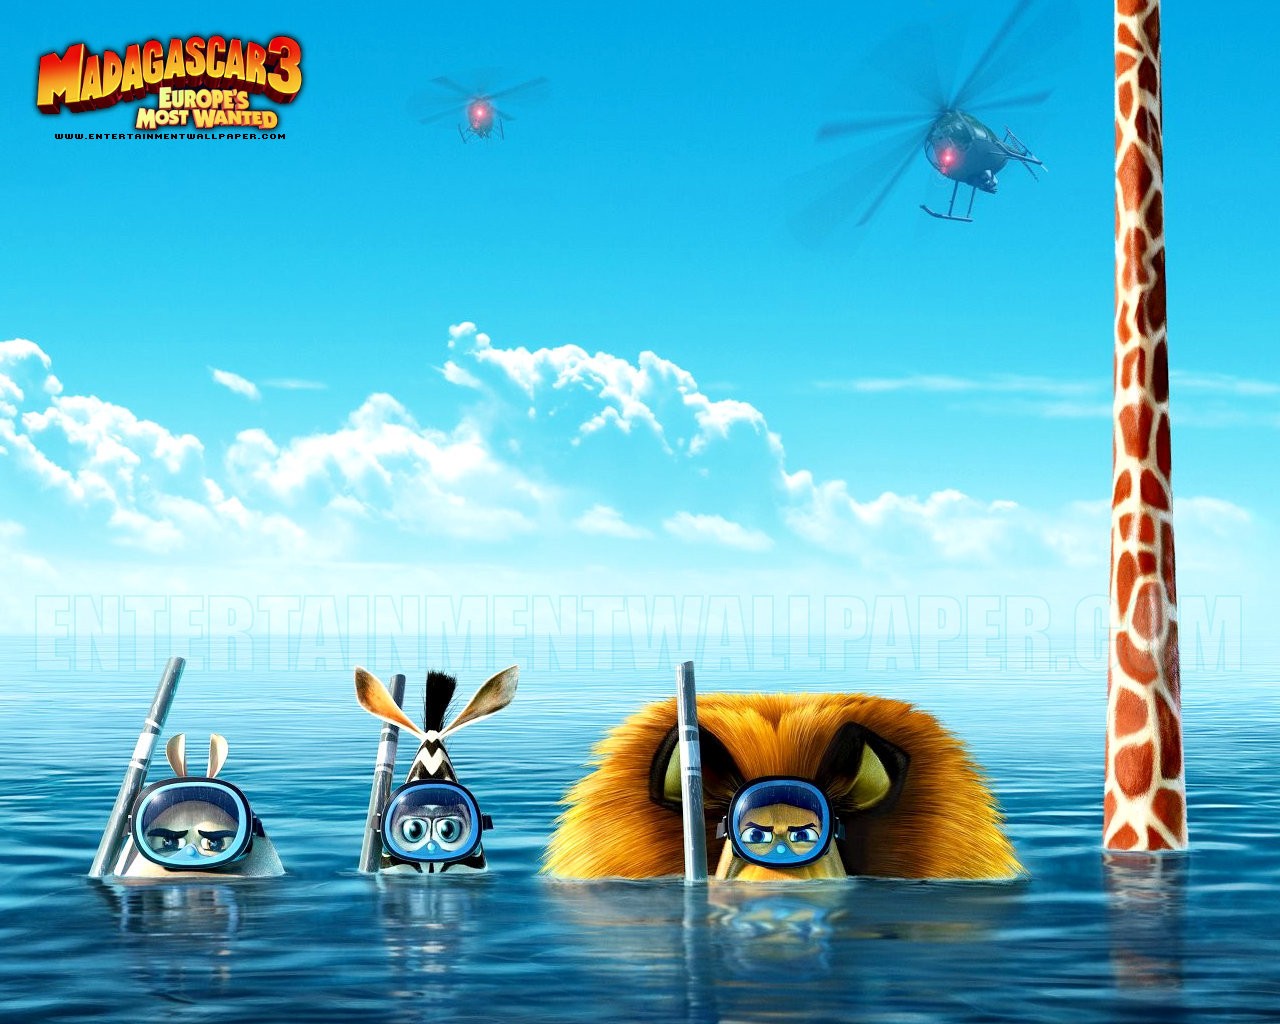 Madagascar Europe S Most Wanted Wallpaper Original Size